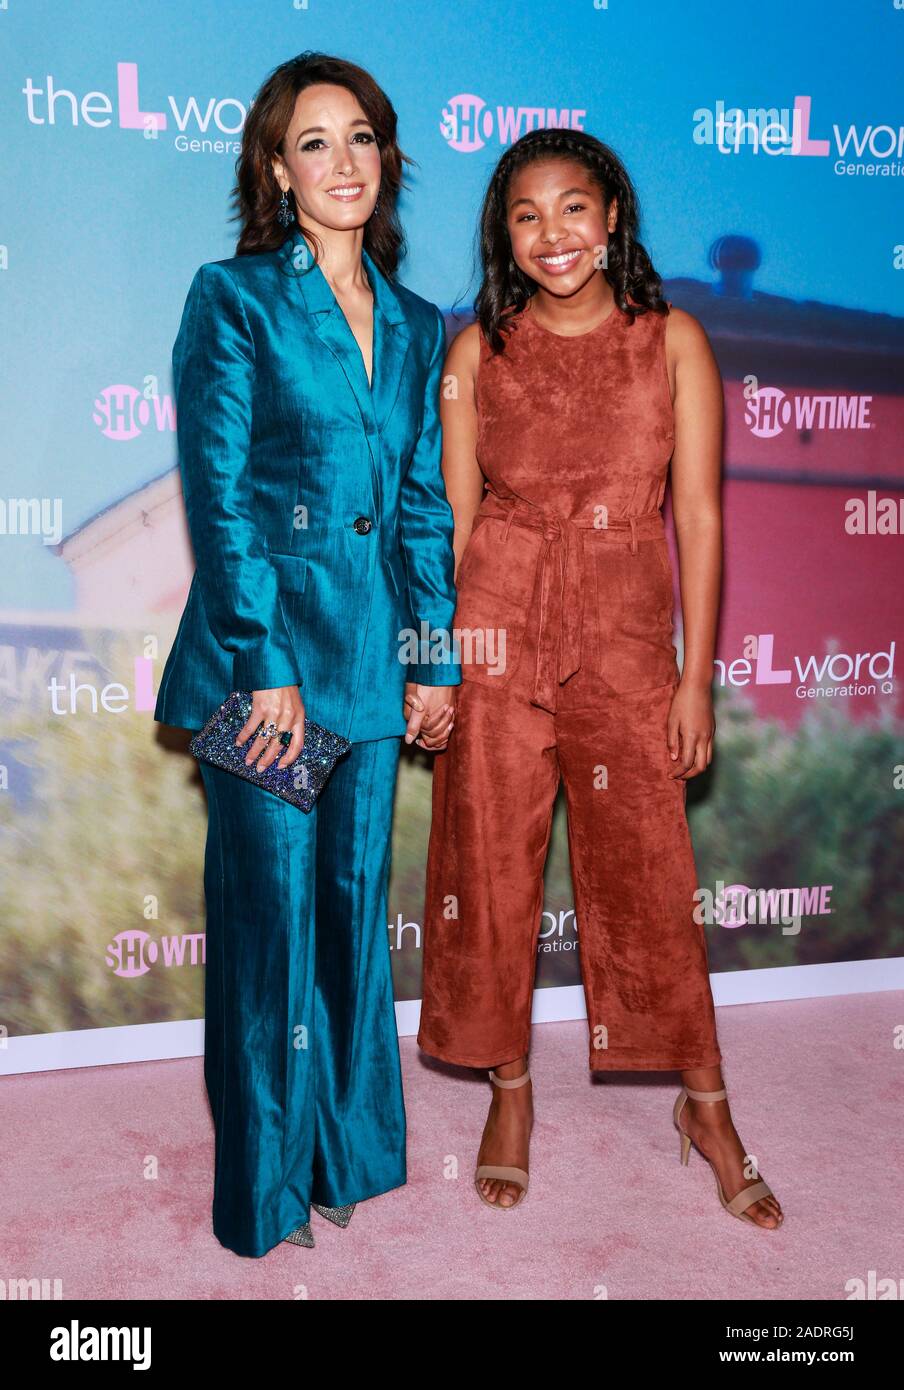 Los Angeles, CA - December 02, 2019: Jennifer Beals and Jordan Hull attend the premiere of Showtime's 'The L Word: Generation Q' at the Regal LA Live Stock Photo